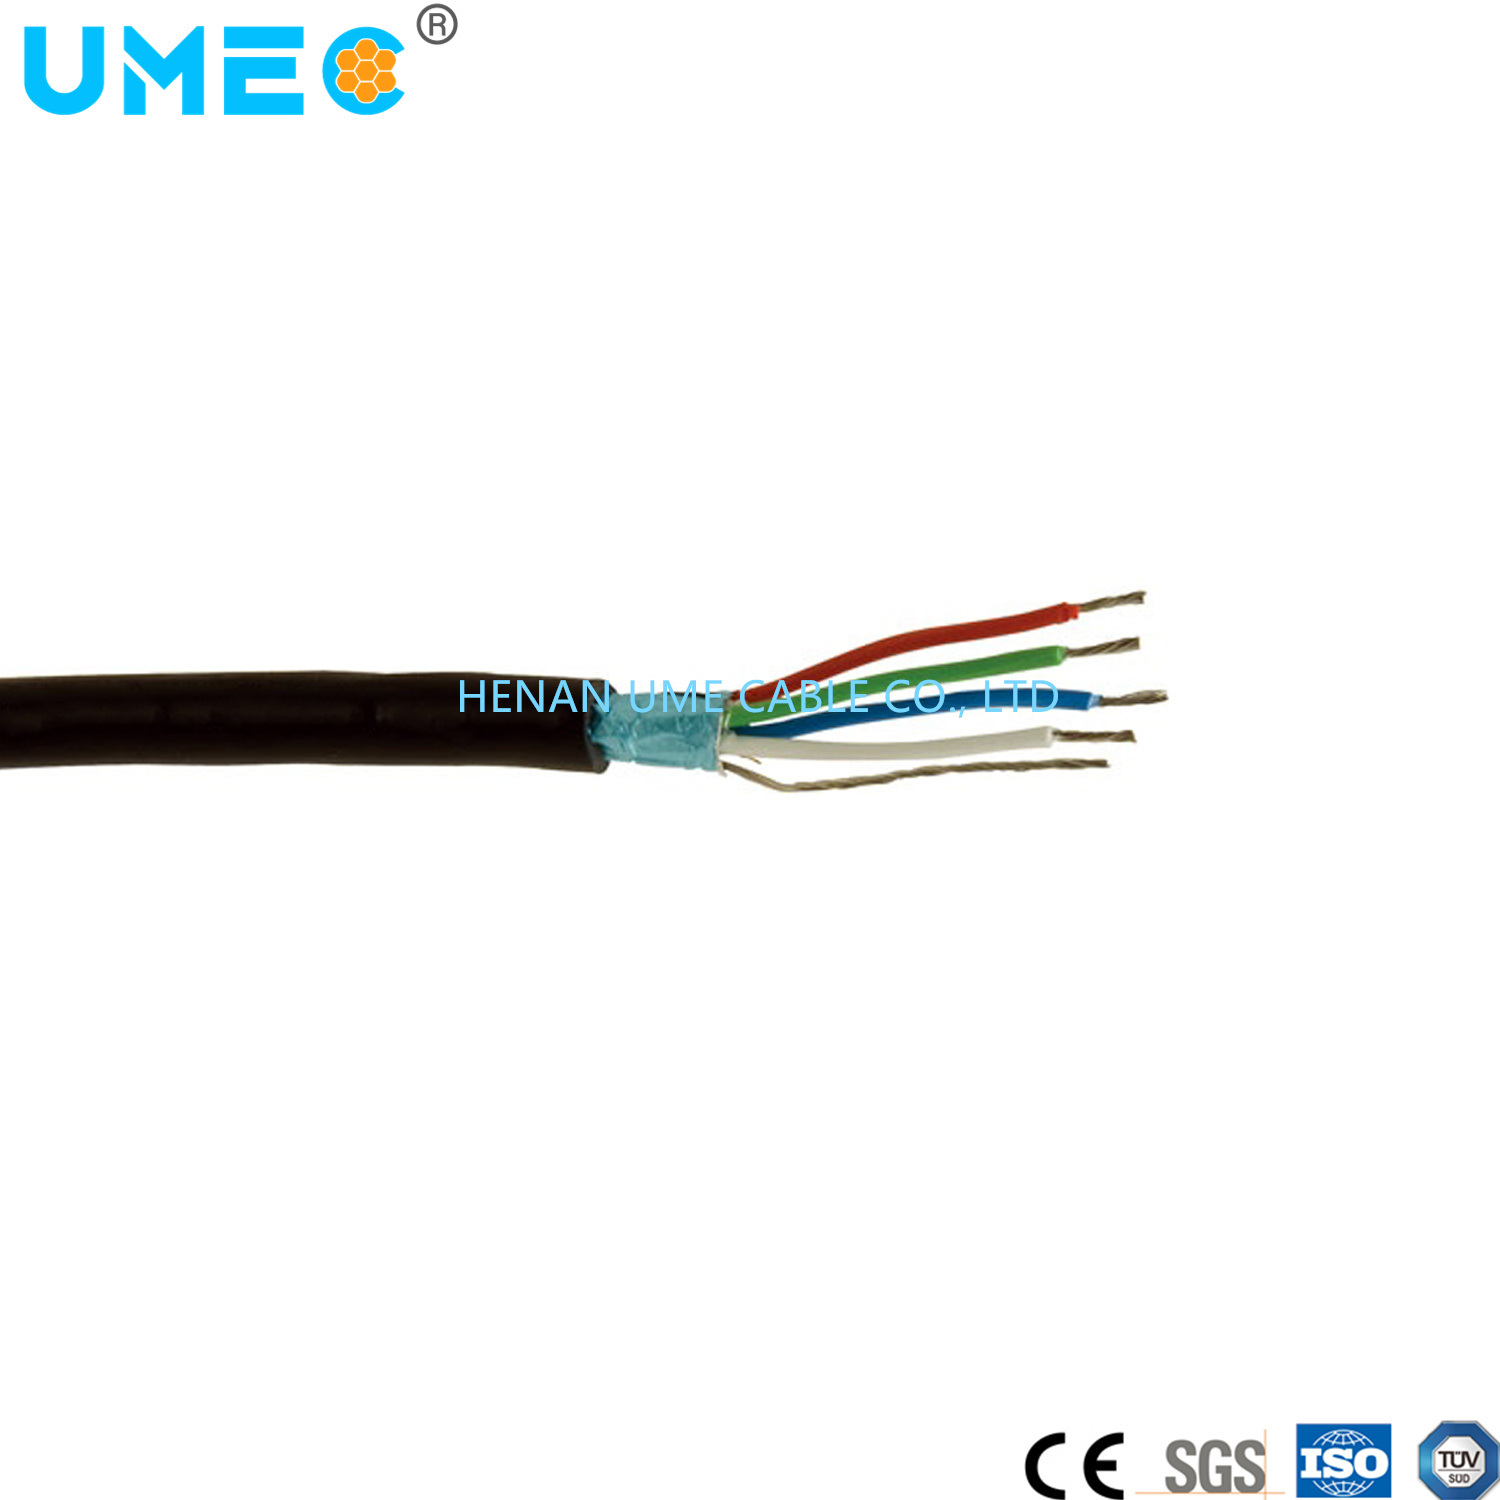 Low Voltage 300V Tinned Plated Copper Brain Sheilding Cable DMX512n Cable